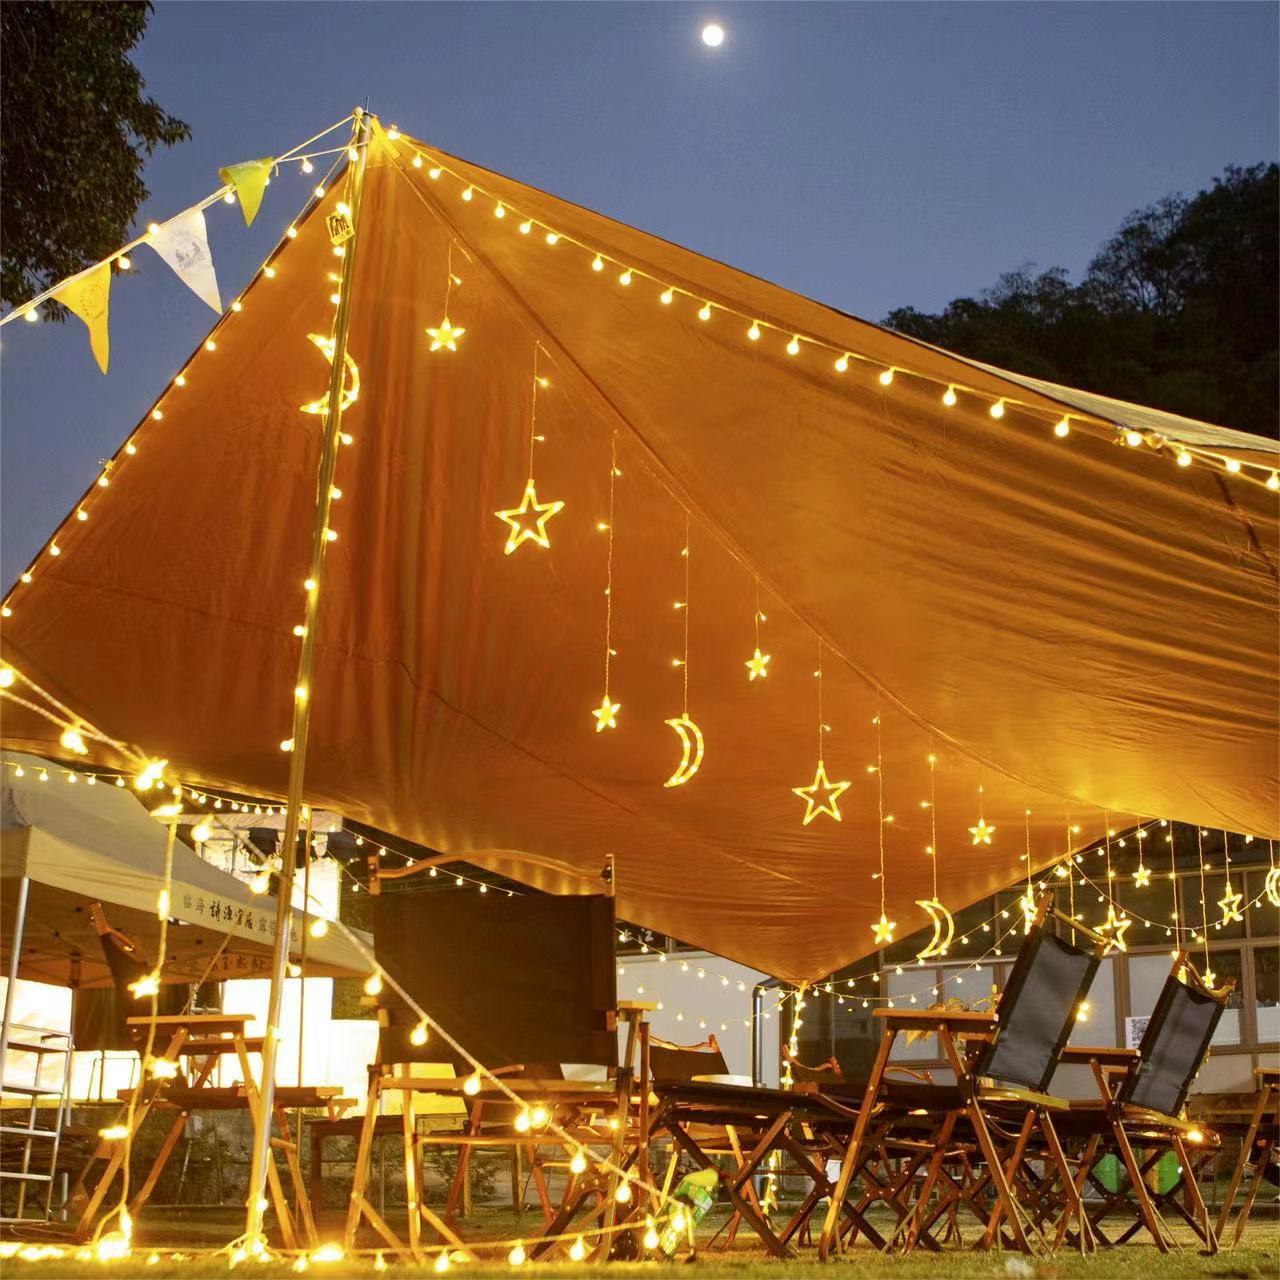 Outdoor Camping Ambience Light Star Light Usb Stall Camping Decorations Arrangement Birthday Canopy Tent Lighting Chain Light Strip